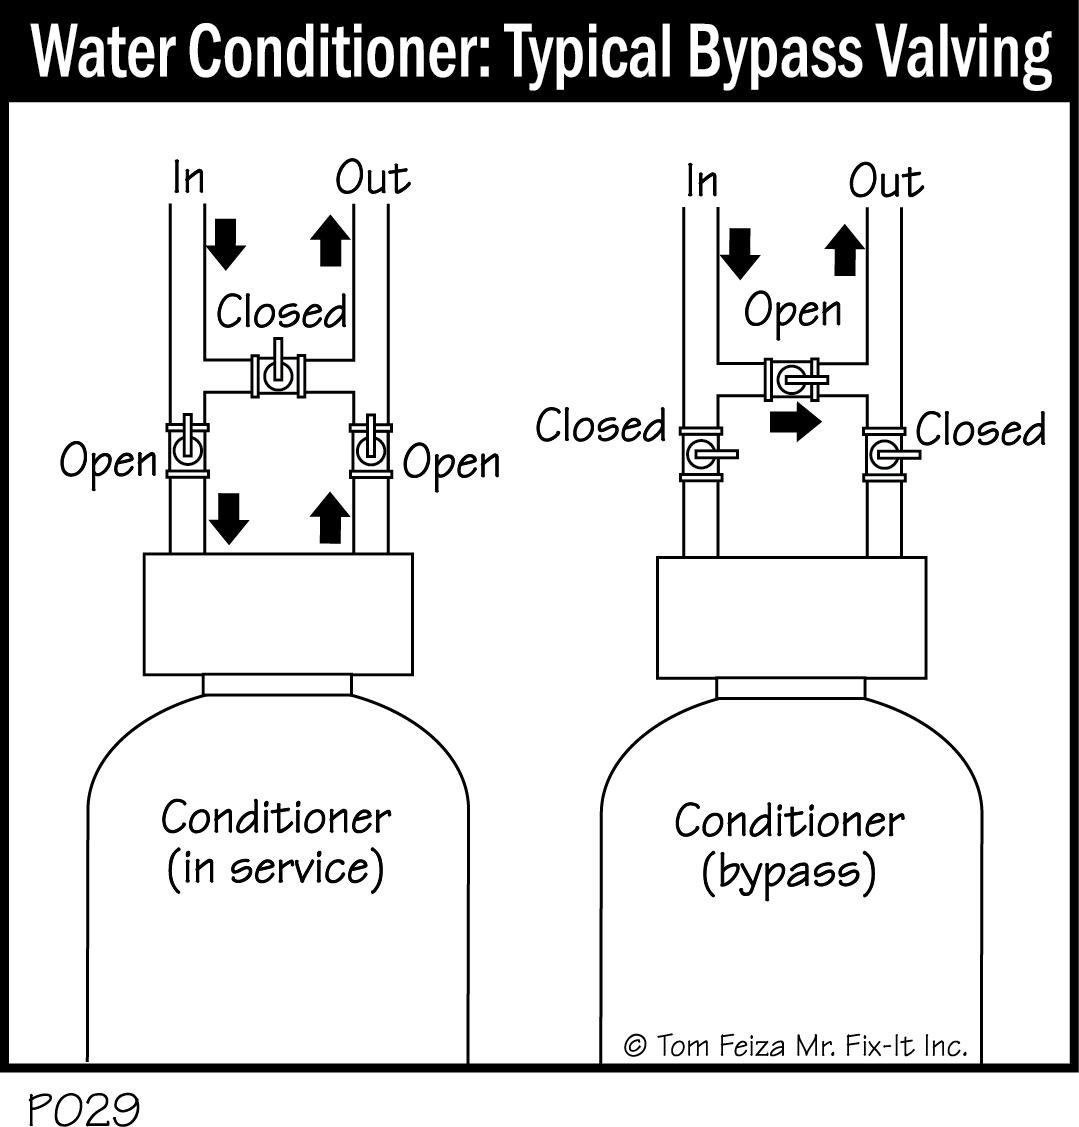 P029 - Water Conditioner_ Typical Bypass Valving